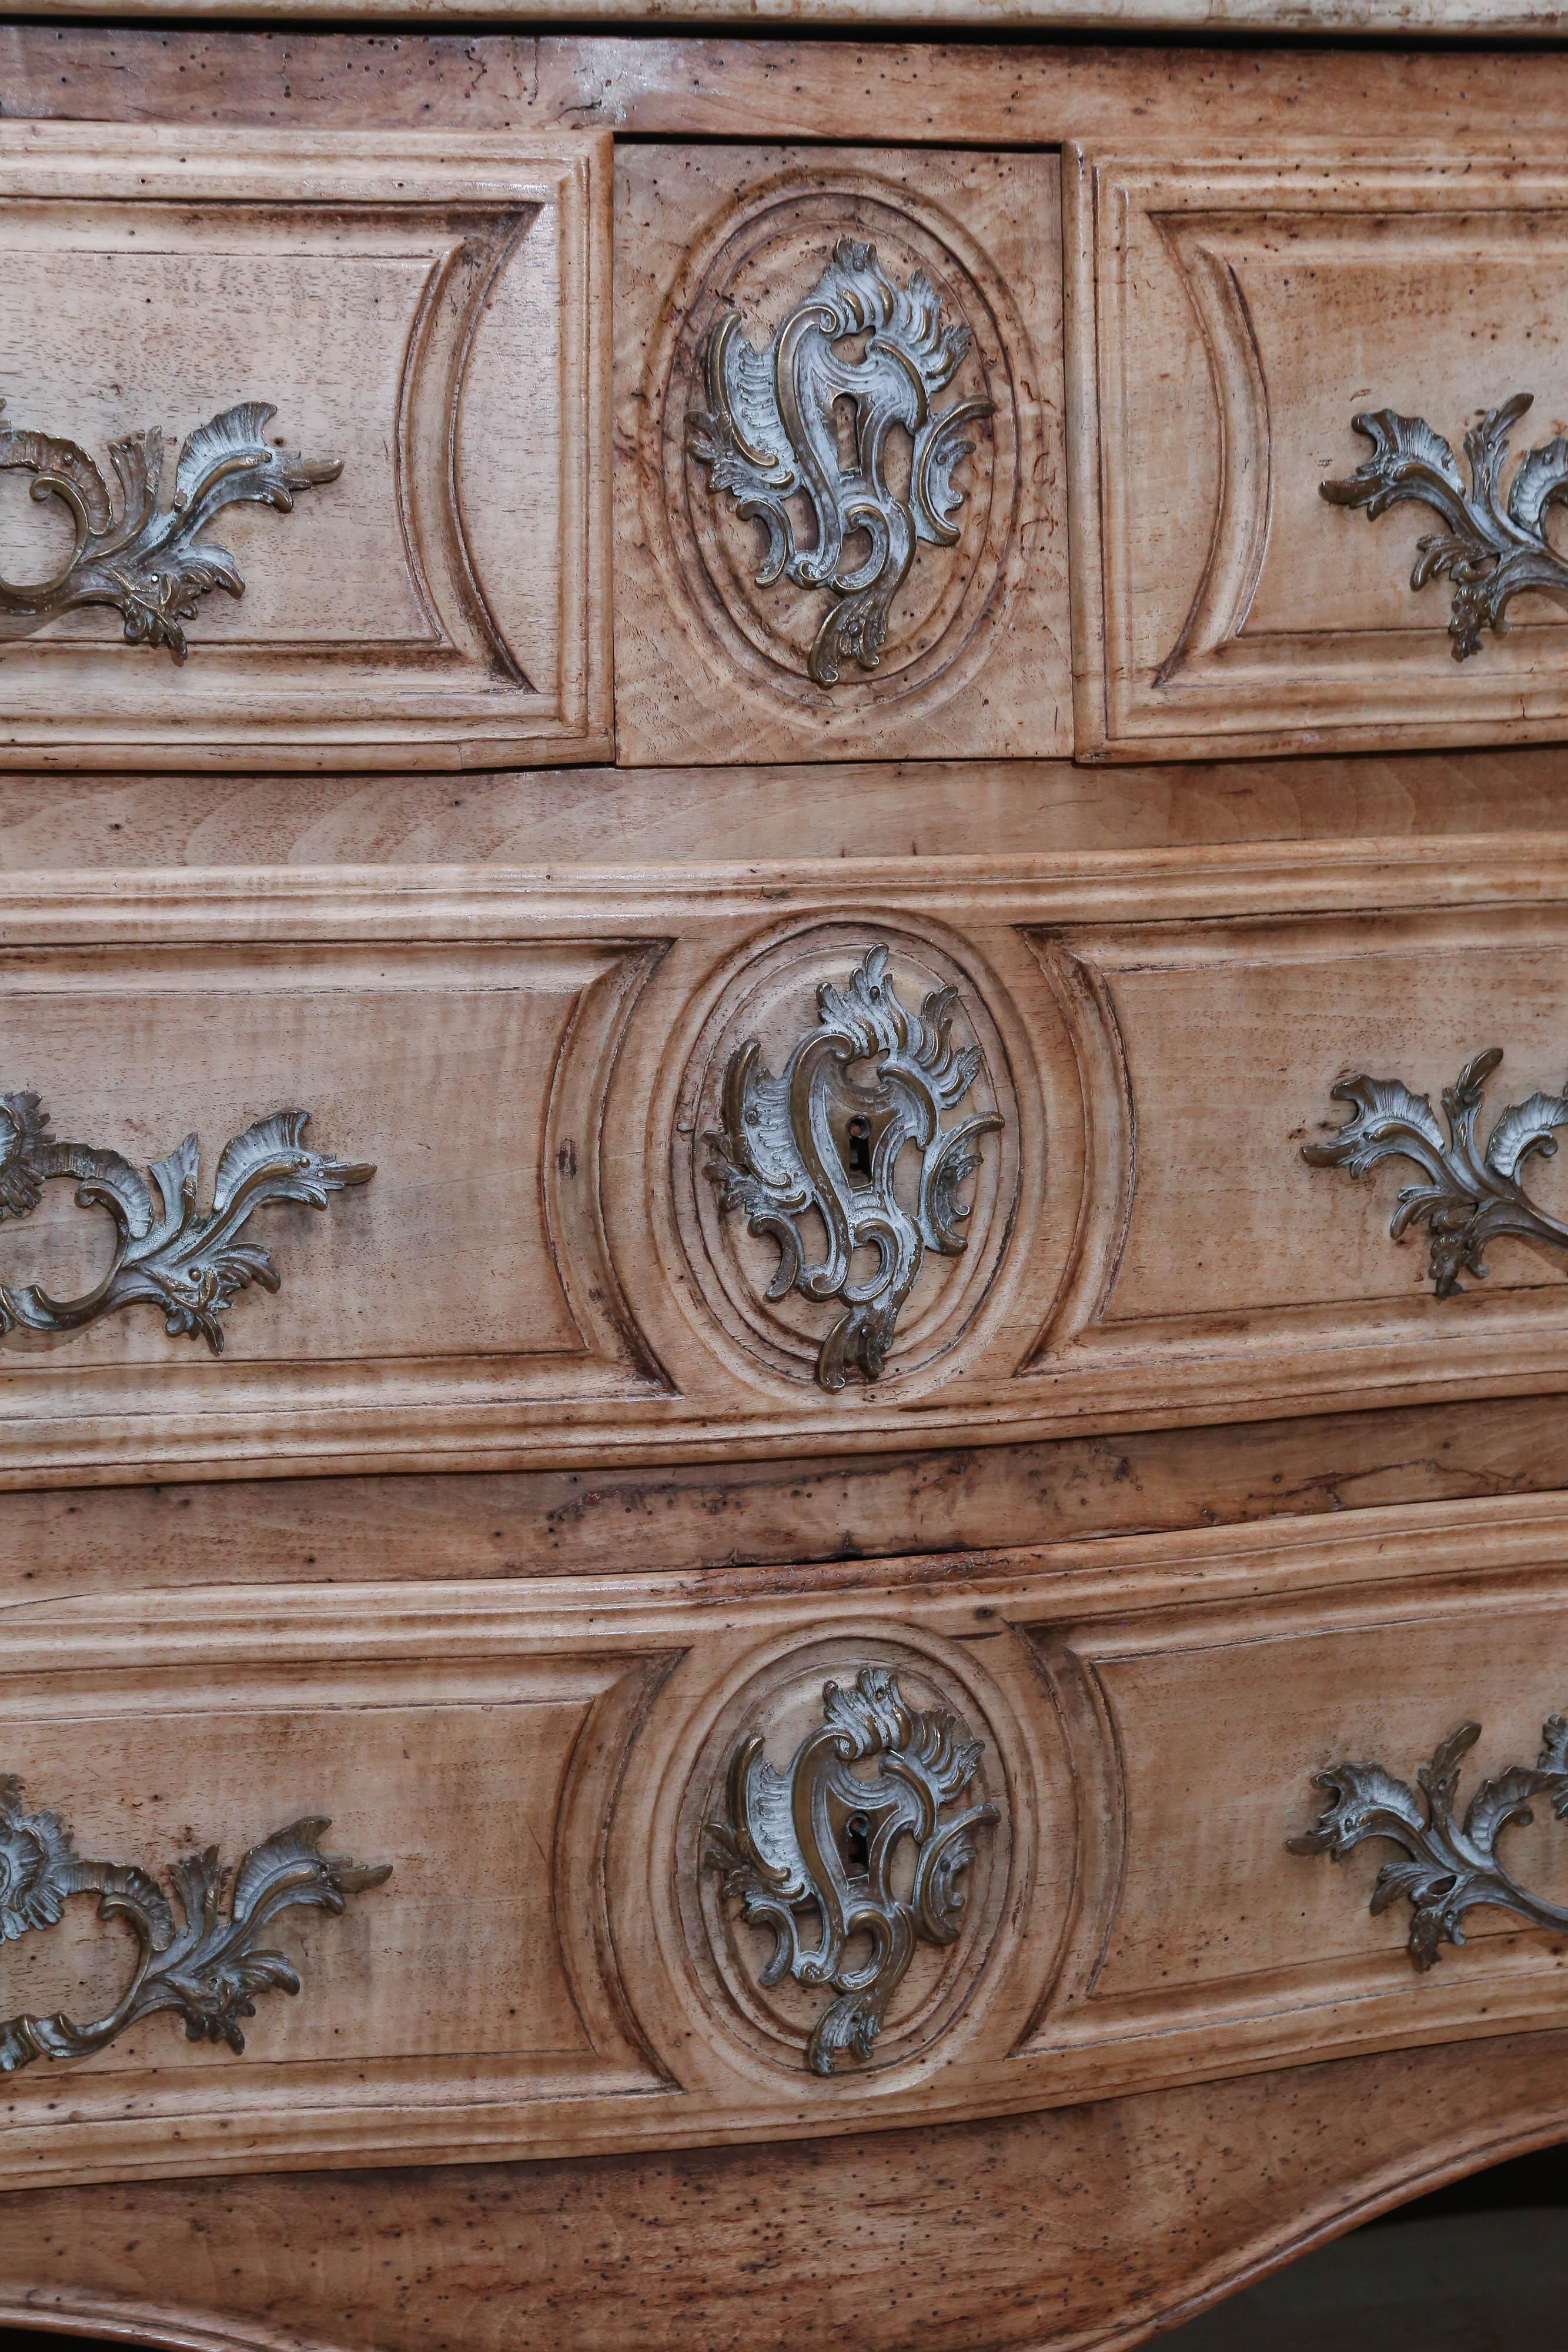 Walnut French three-drawer Louis XV chest with shaped marble top in neutral and greys.
Drawer fronts have three carved panels, each surrounding the hardware.
Sides also feature carved panels and front legs are cabriole.
Chest is adorned with